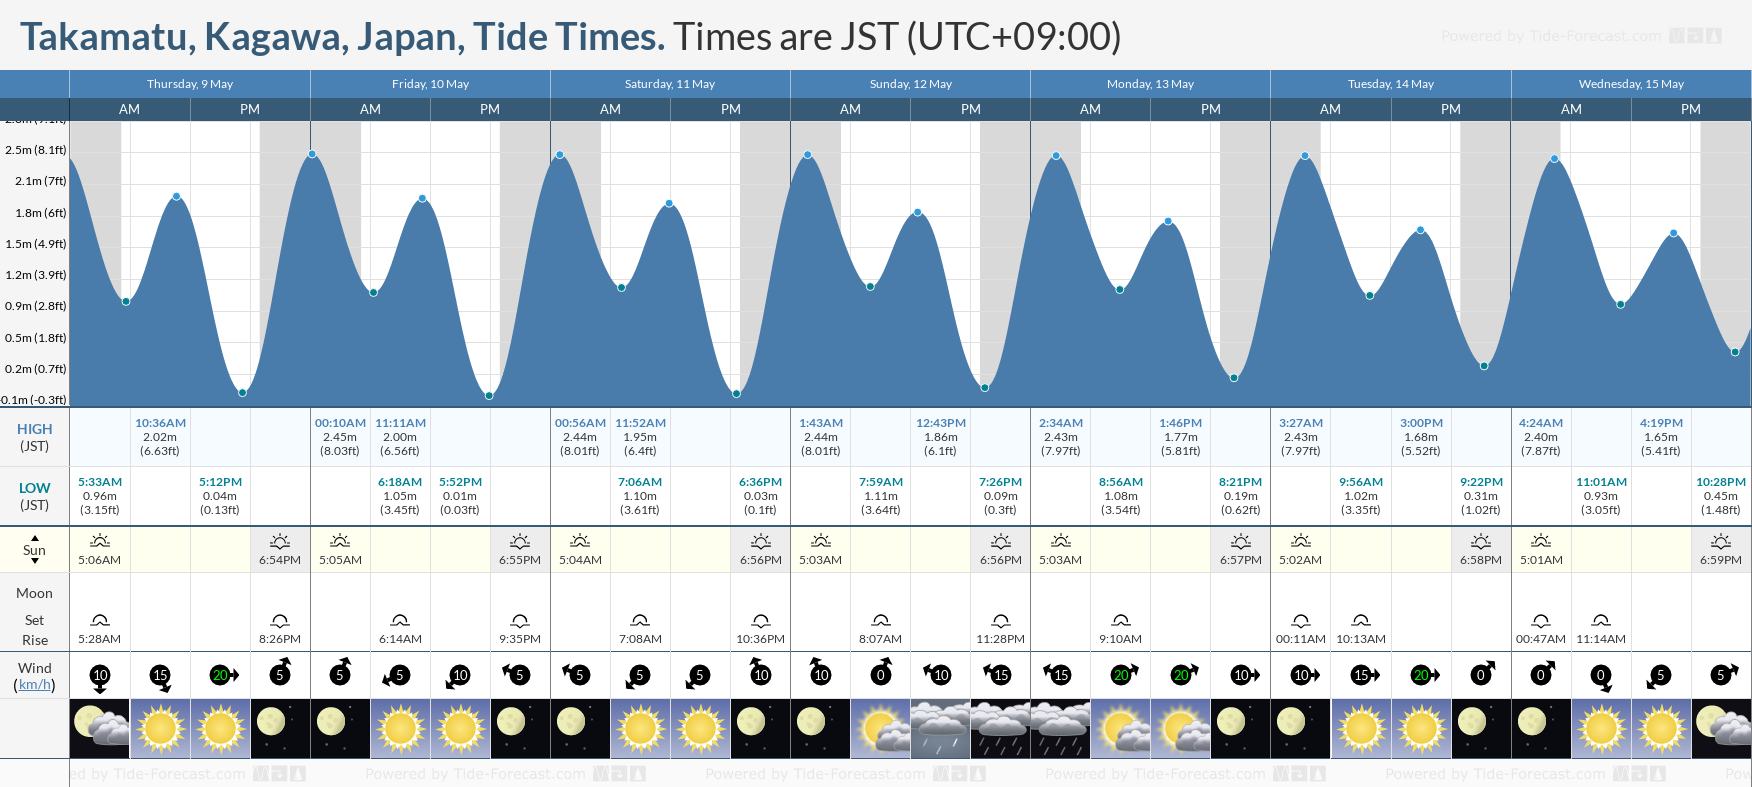 Takamatu, Kagawa, Japan Tide Chart including high and low tide tide times for the next 7 days